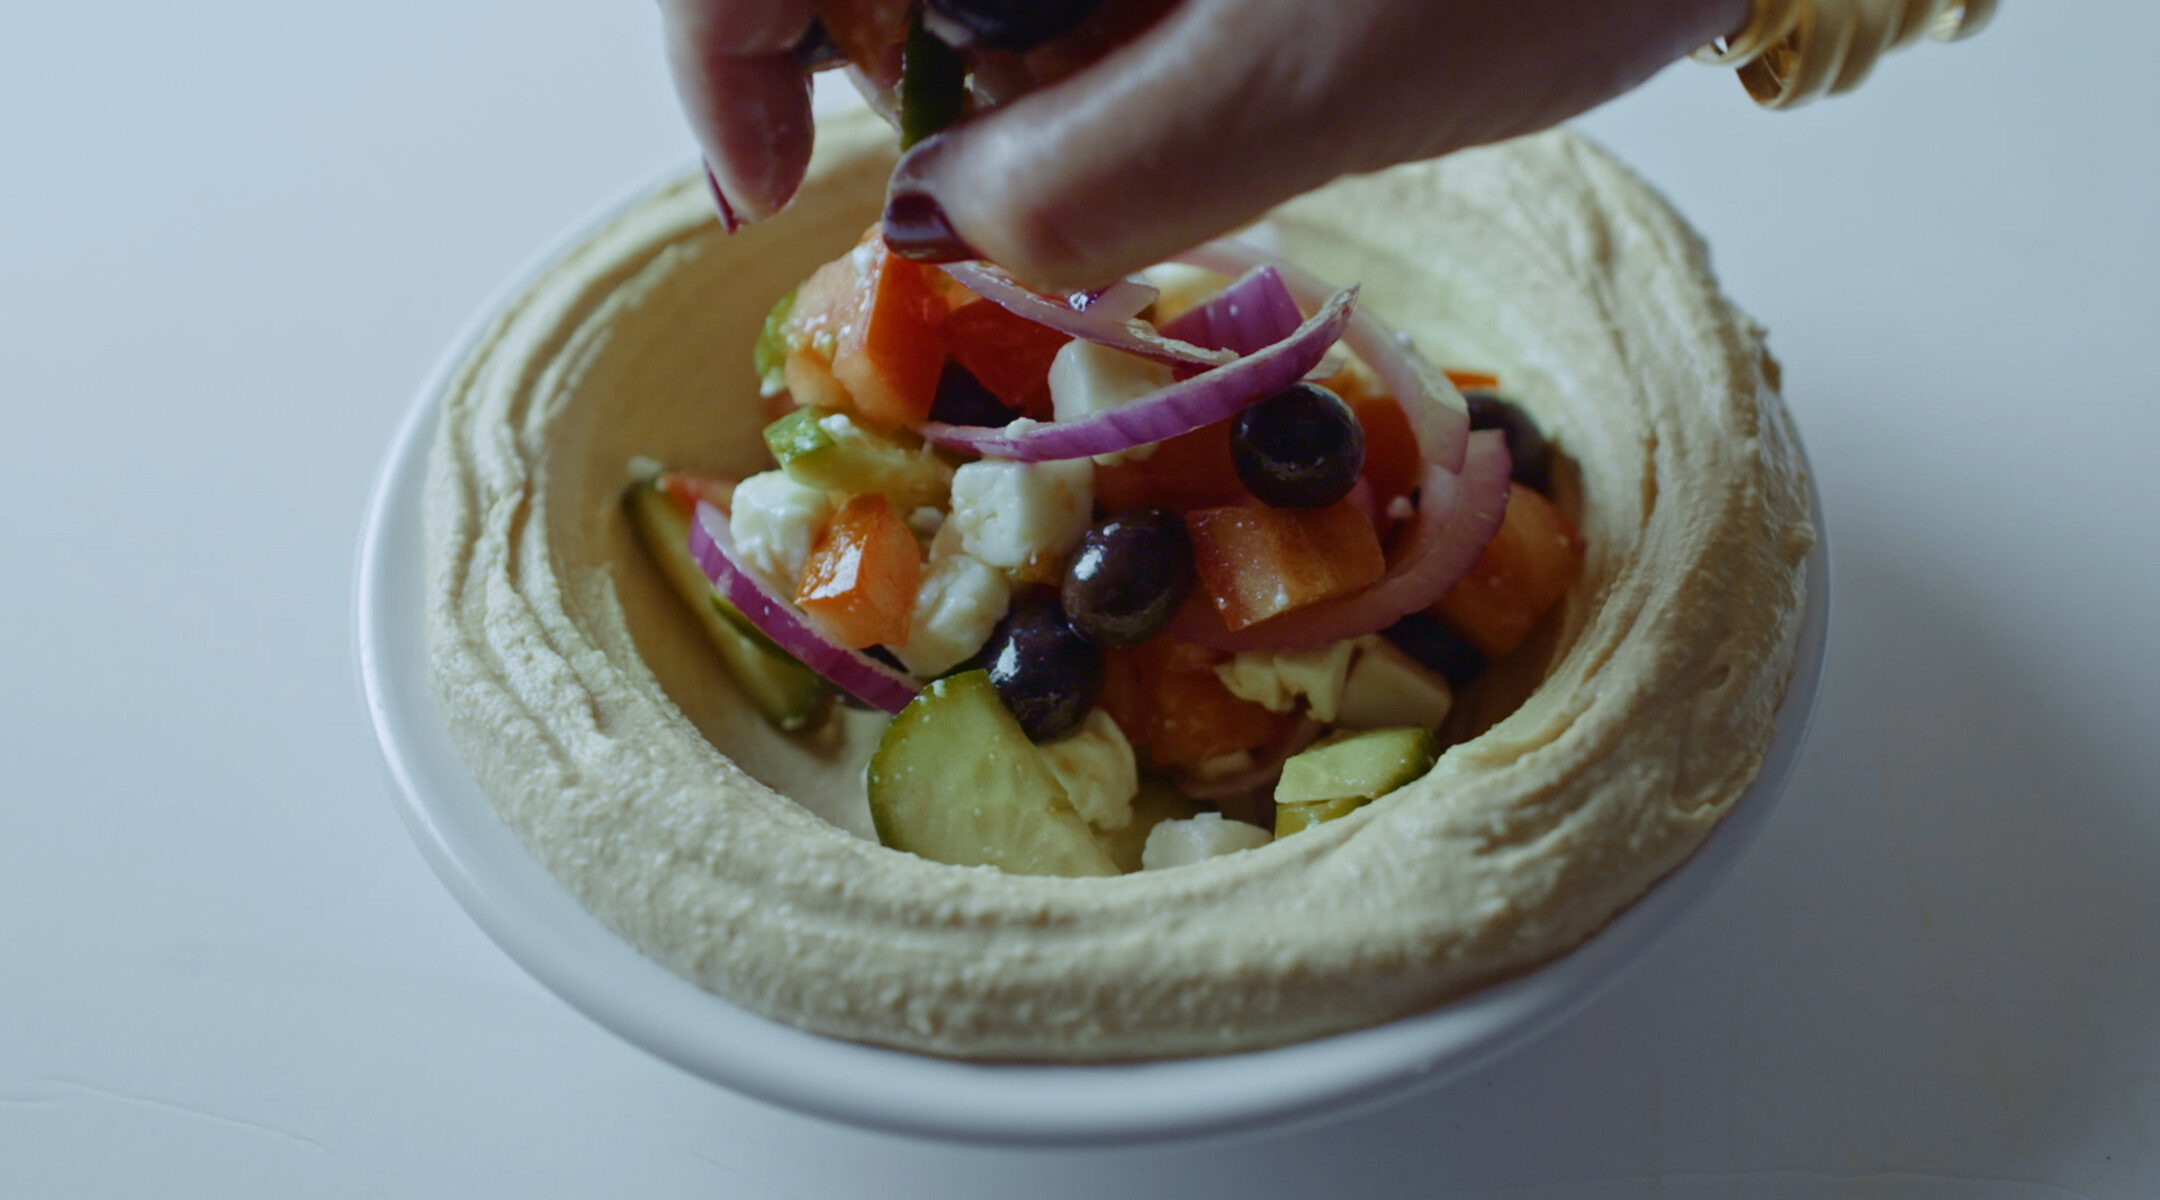 Hummus topped with Greek salad